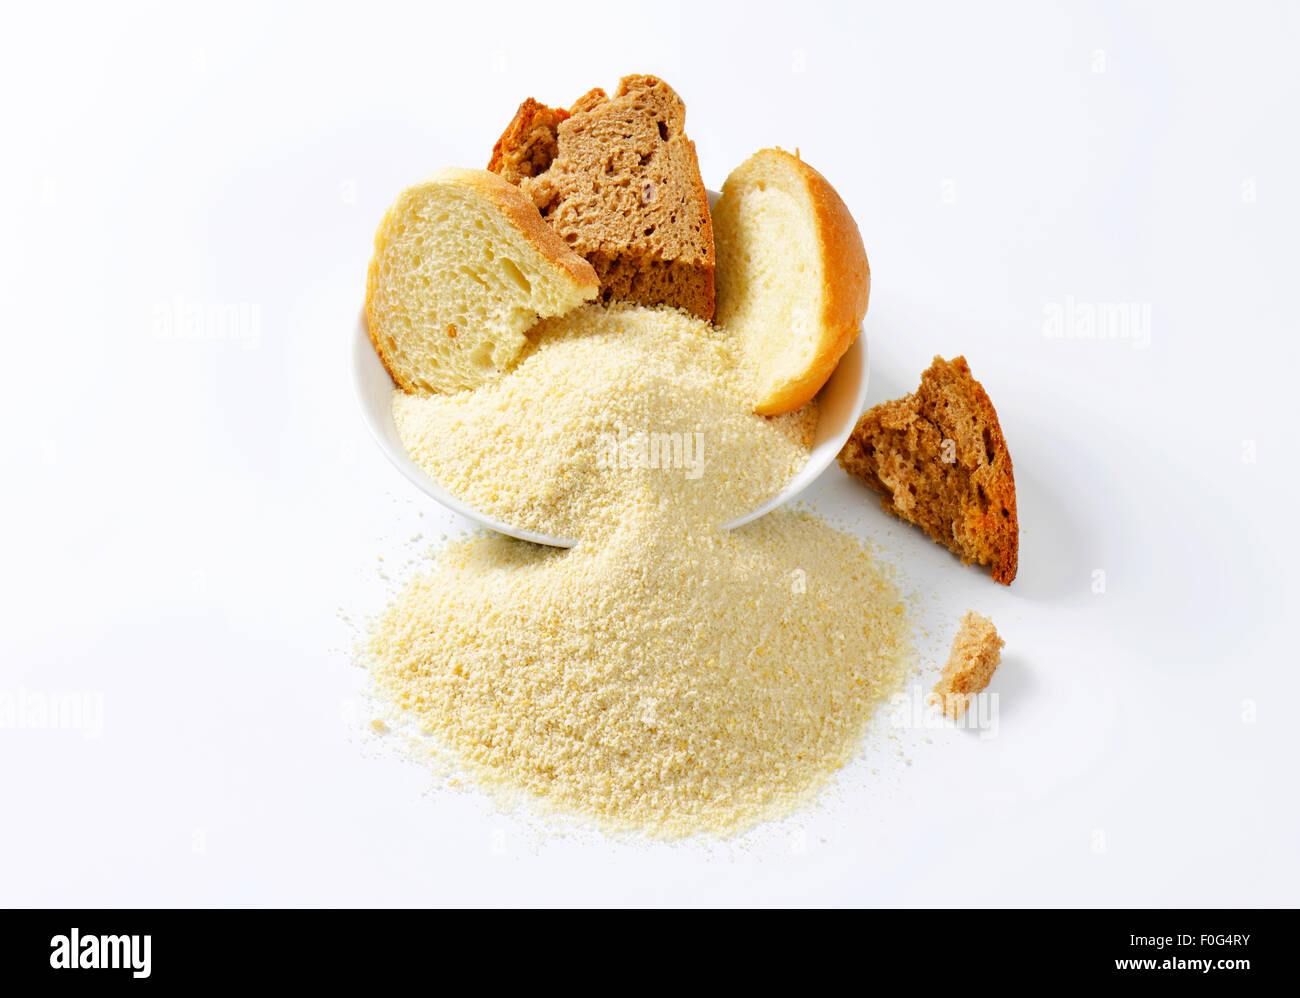 Pieces of stale bread and pile of finely ground bread crumbs Stock Photo